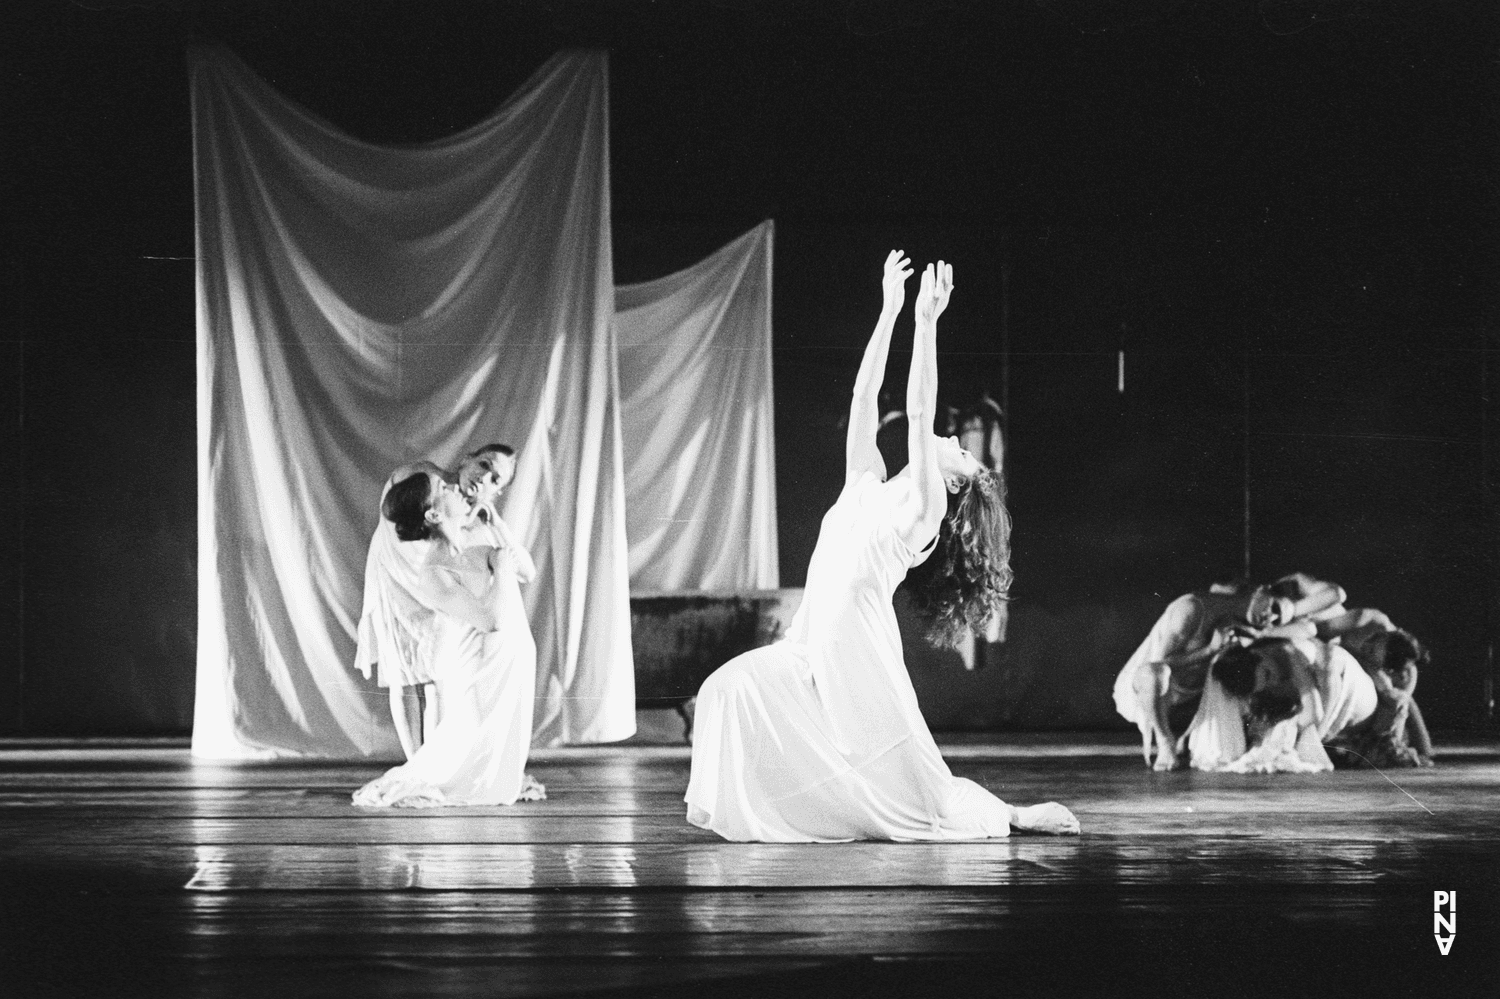 Malou Airaudo and Vivienne Newport in “Iphigenie auf Tauris” by Pina Bausch with Tanztheater Wuppertal at Opernhaus Wuppertal (Germany), April 20, 1974